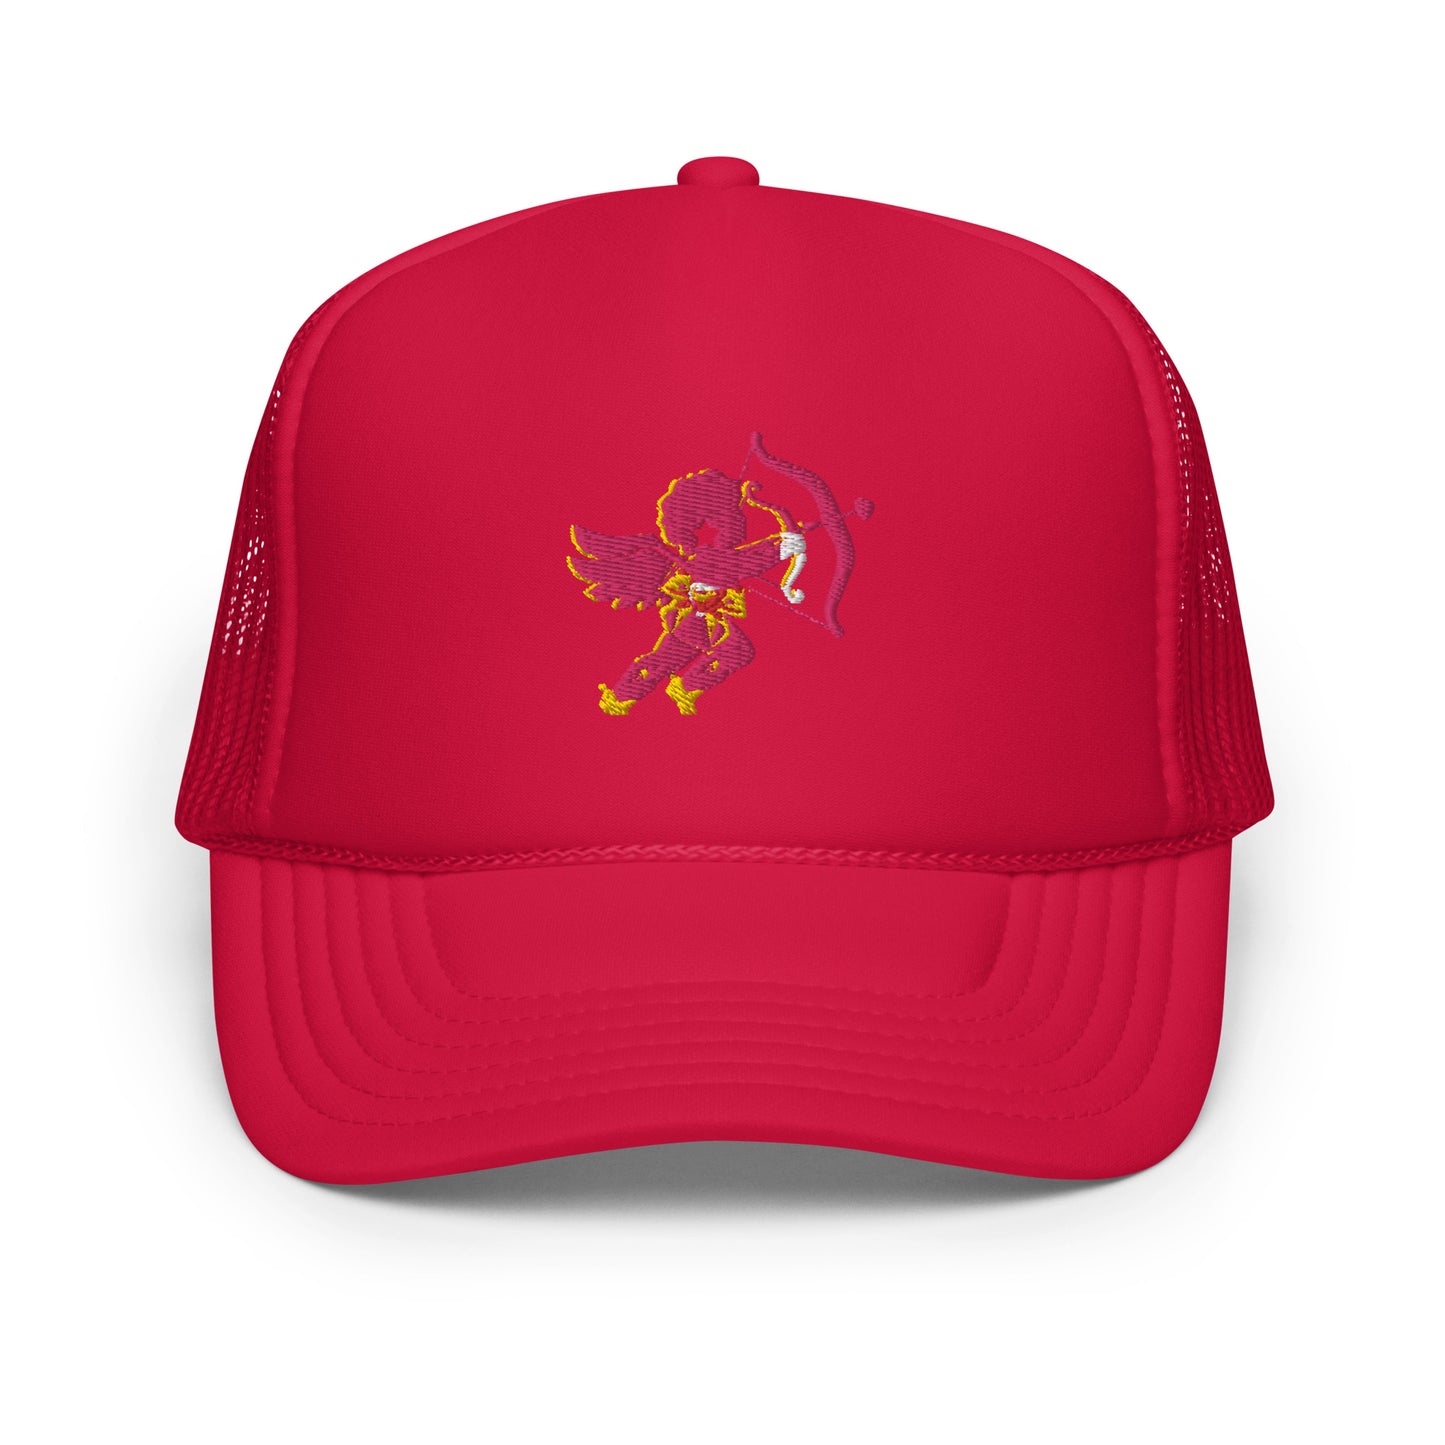 Cupid Collection Foam Trucker Hat by Whimsie Todd